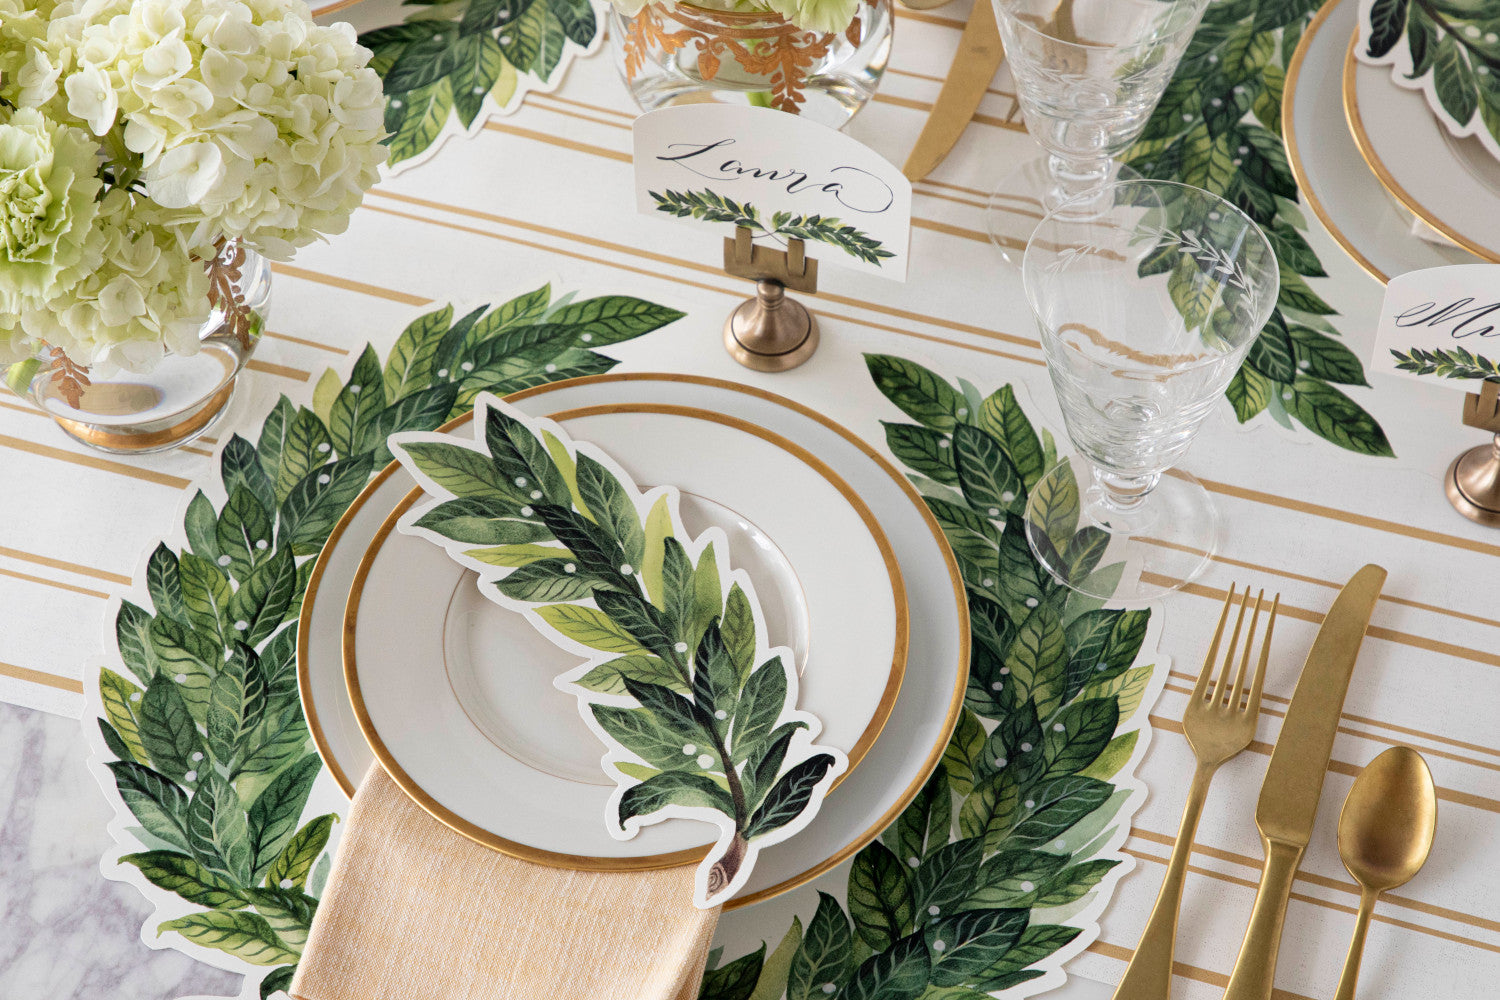 An elegant place setting with gold accents featuring a Laurel Table Accent resting on the plate.